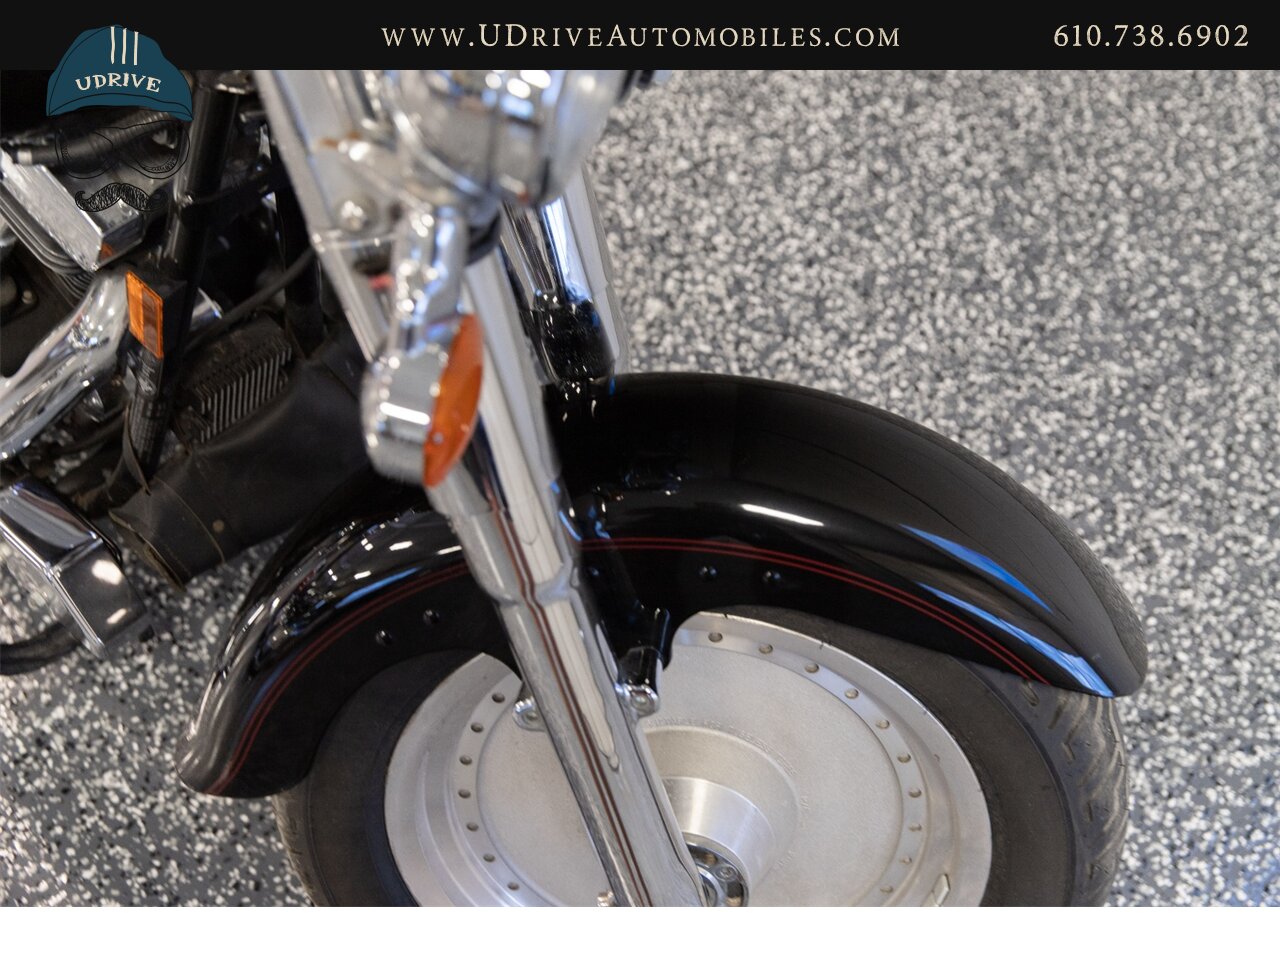 1999 Harley-Davidson Touring FLSTF Fatboy 2k Miles 1 Owner   - Photo 49 - West Chester, PA 19382